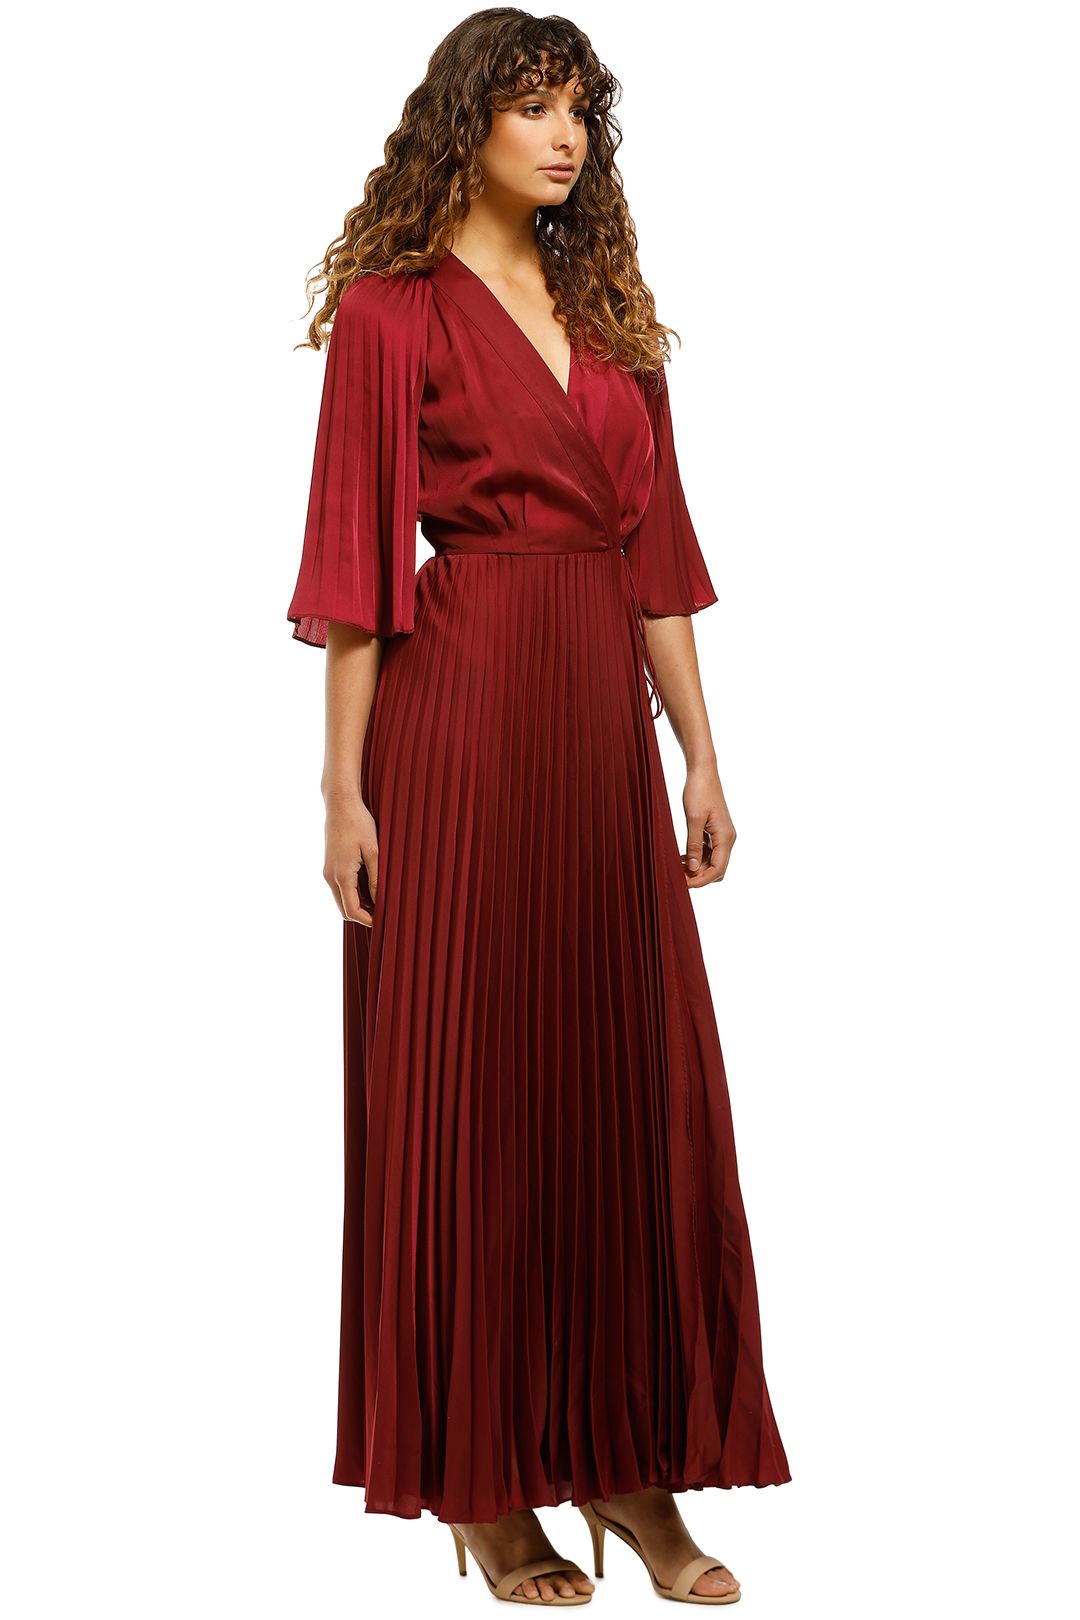 Ginger-and-Smart-Tempera-Wrap-Gown-Burgundy-Side